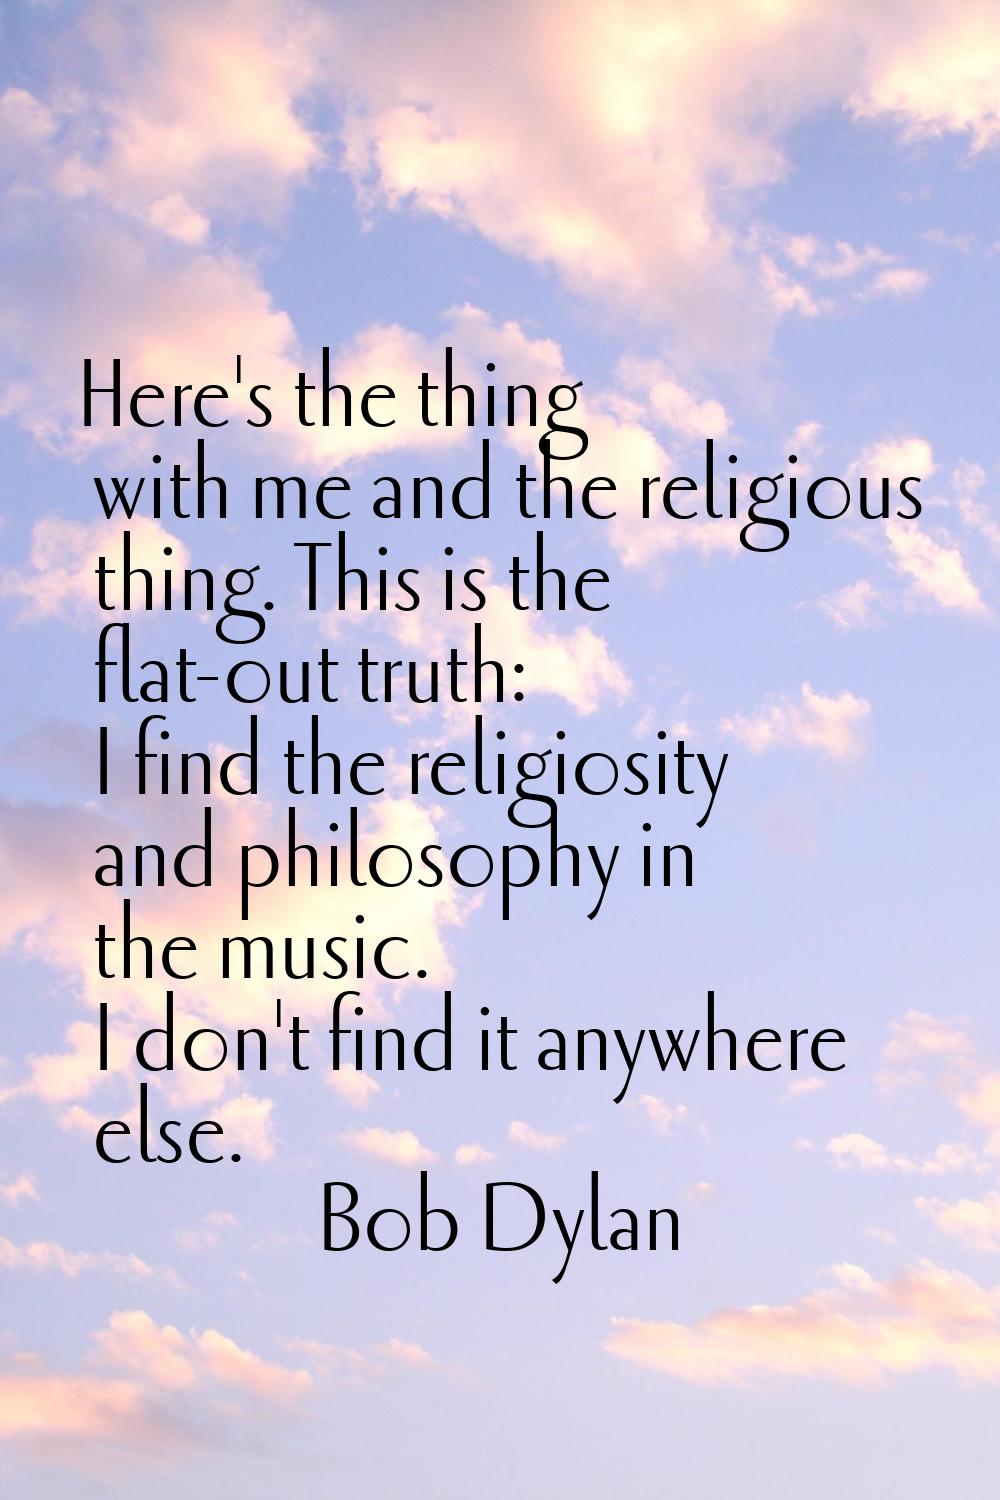 Here's the thing with me and the religious thing. This is the flat-out truth: I find the religiosit